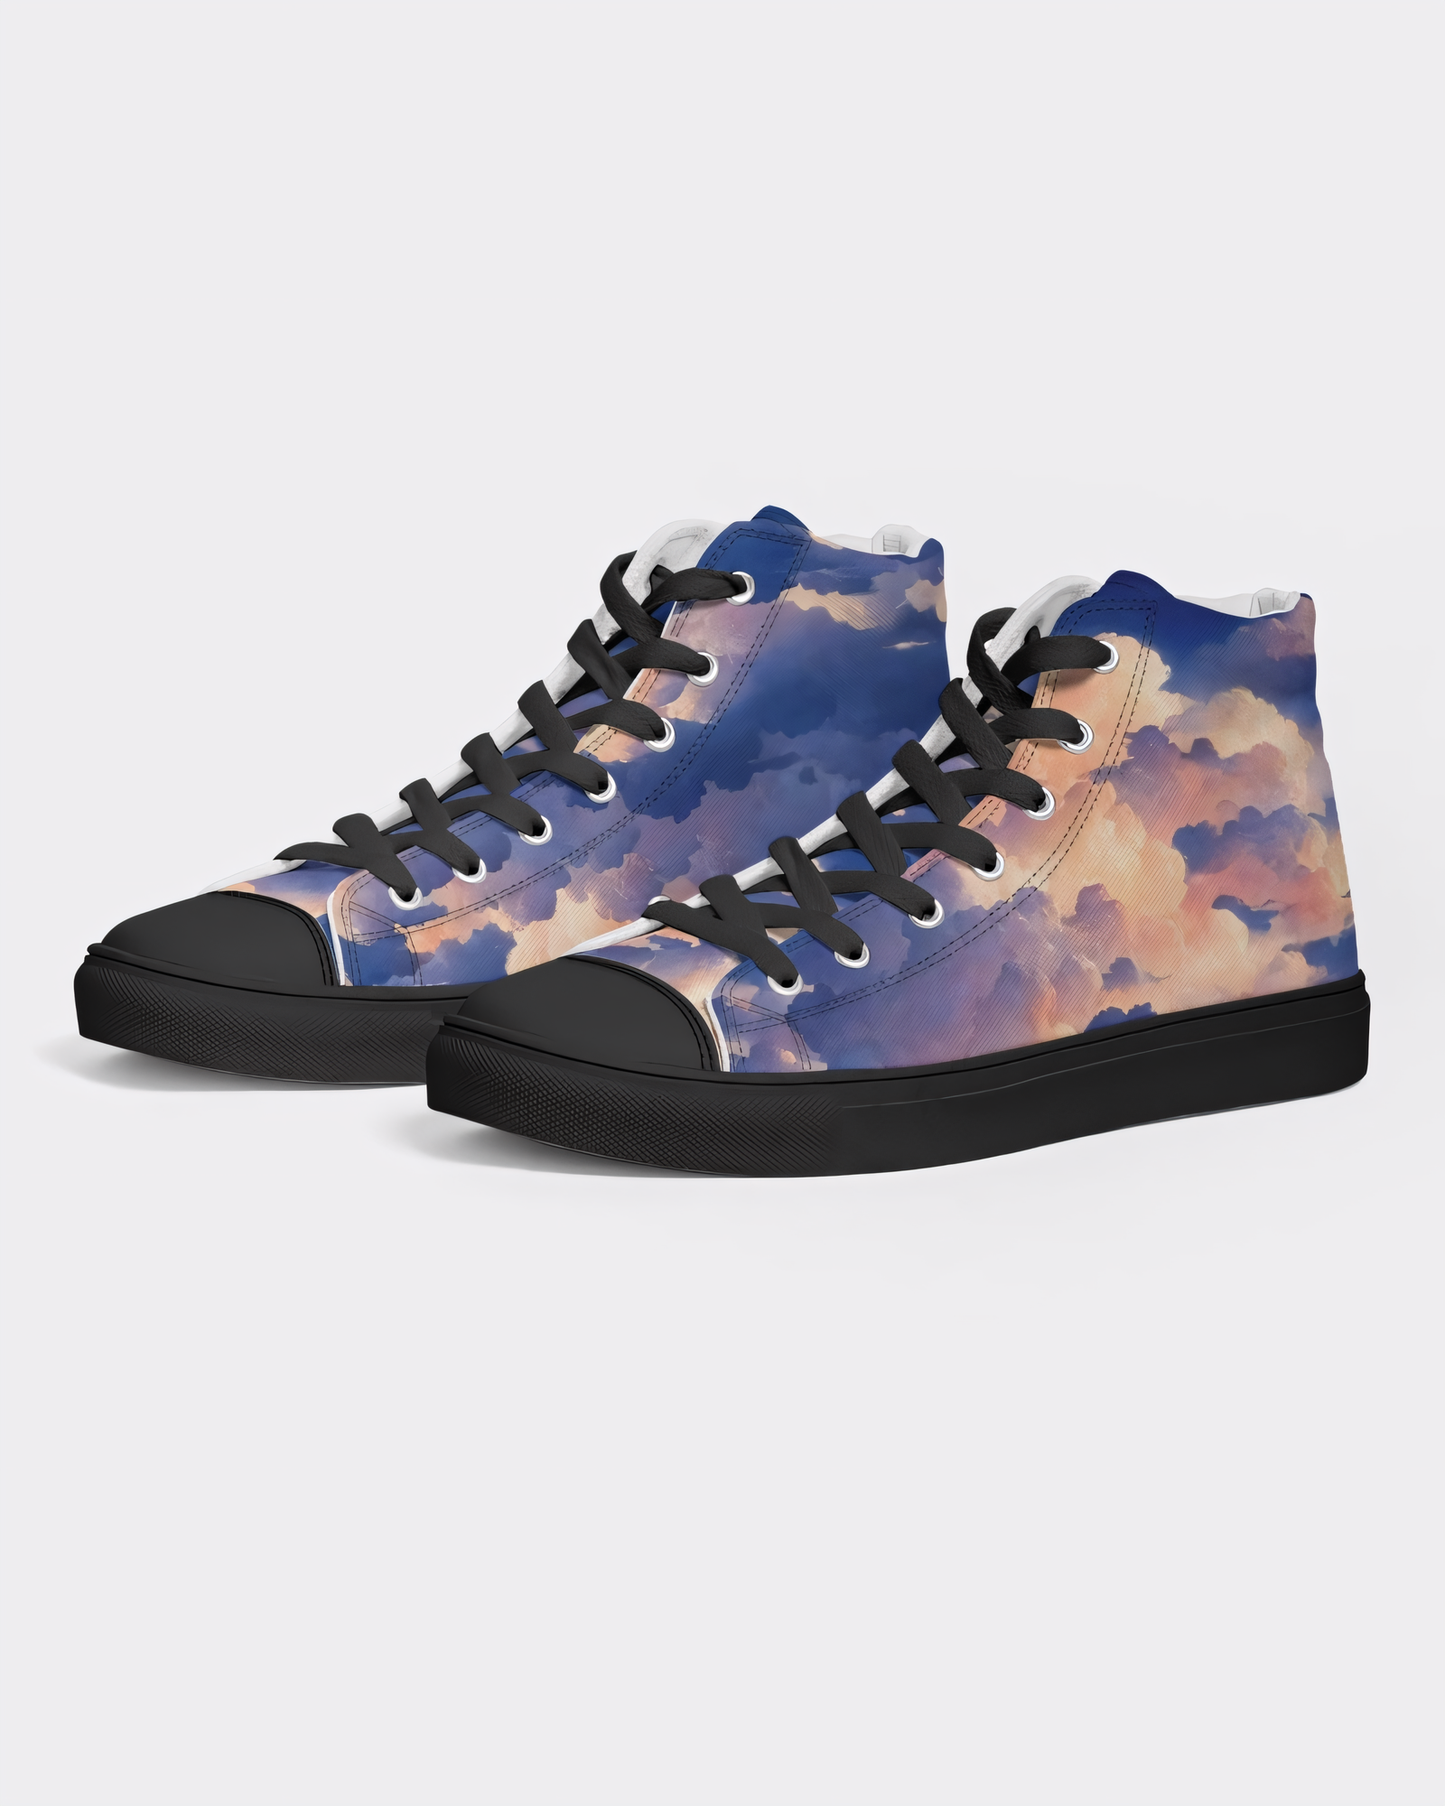 Women's Head in the Clouds High Top Canvas Shoes - Black